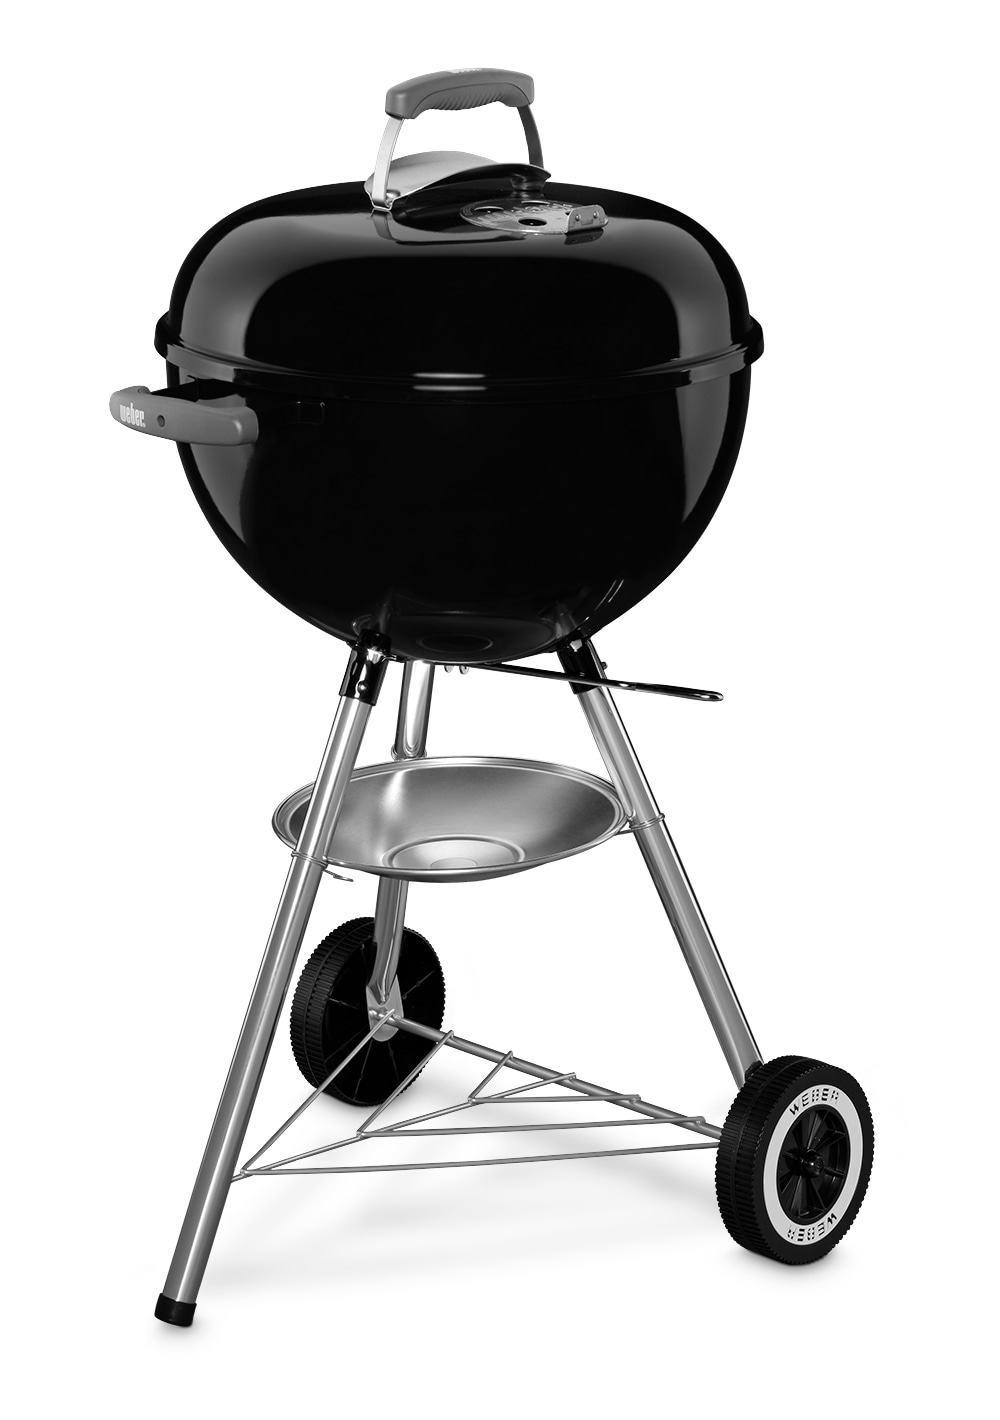 petticoat Infrarood Erfgenaam Weber Original Kettle 18-in W Black Kettle Charcoal Grill in the Charcoal  Grills department at Lowes.com